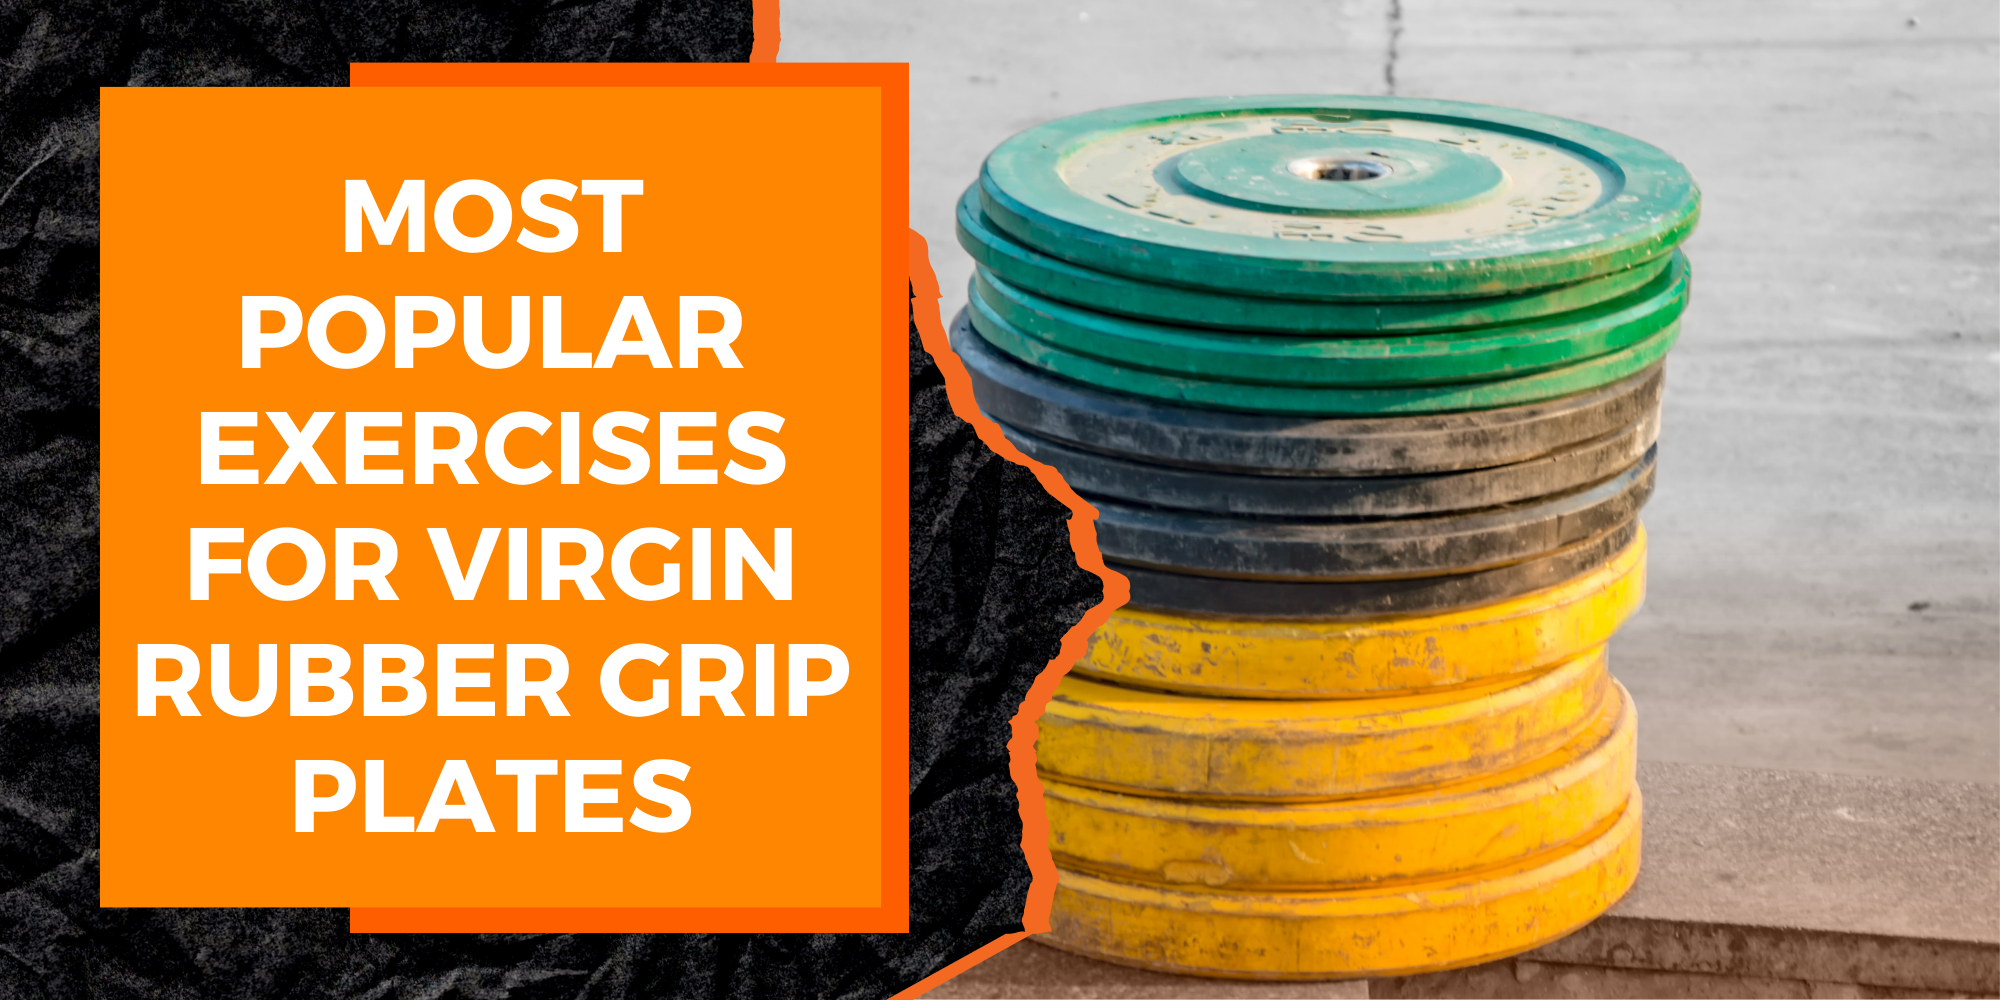 The Most Popular Exercises for Virgin Rubber Grip Plates